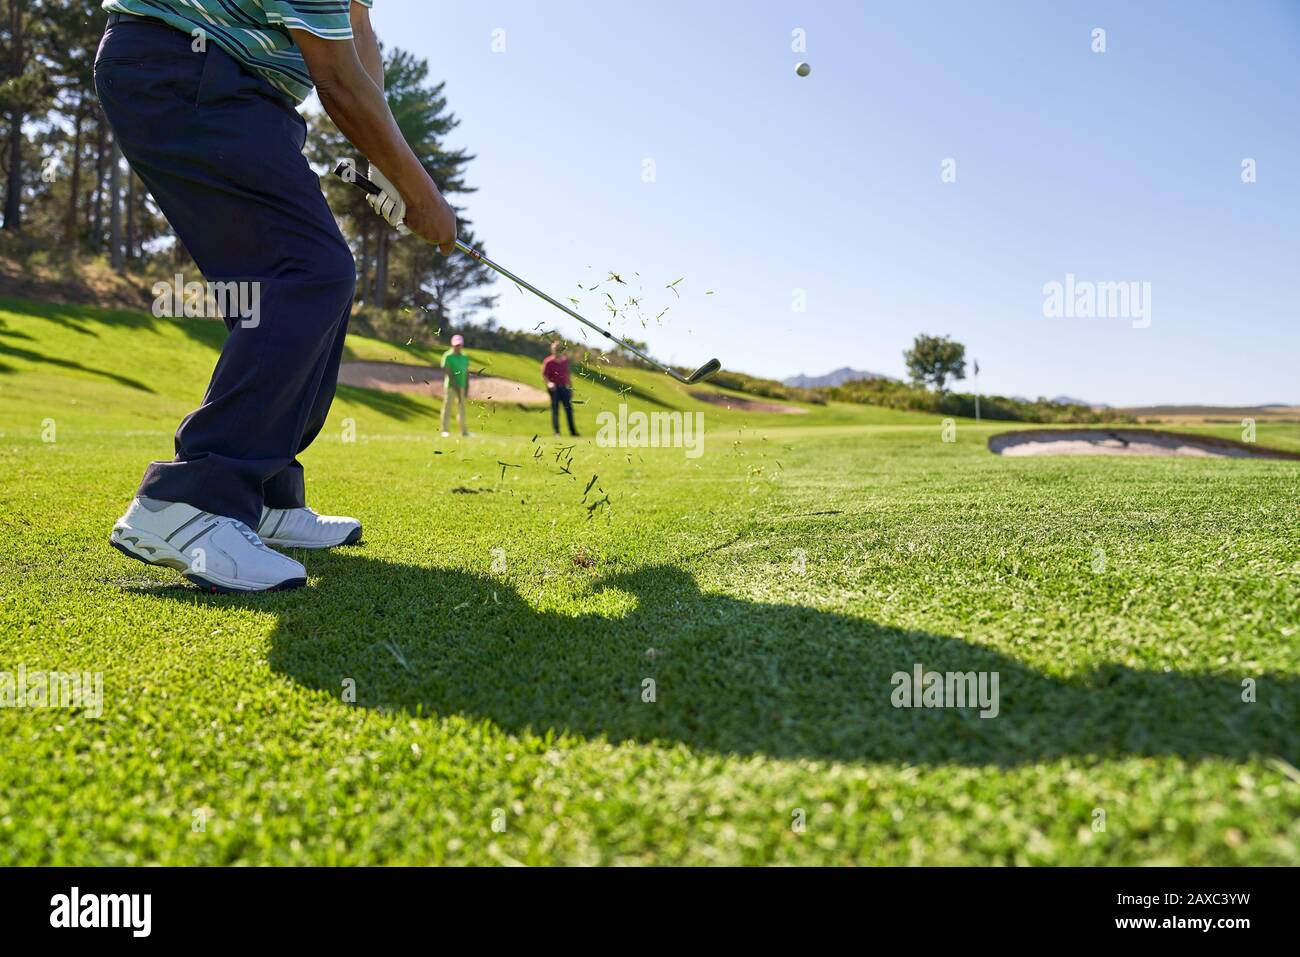 Male golfer taking a shot on sunny golf course Stock Photo